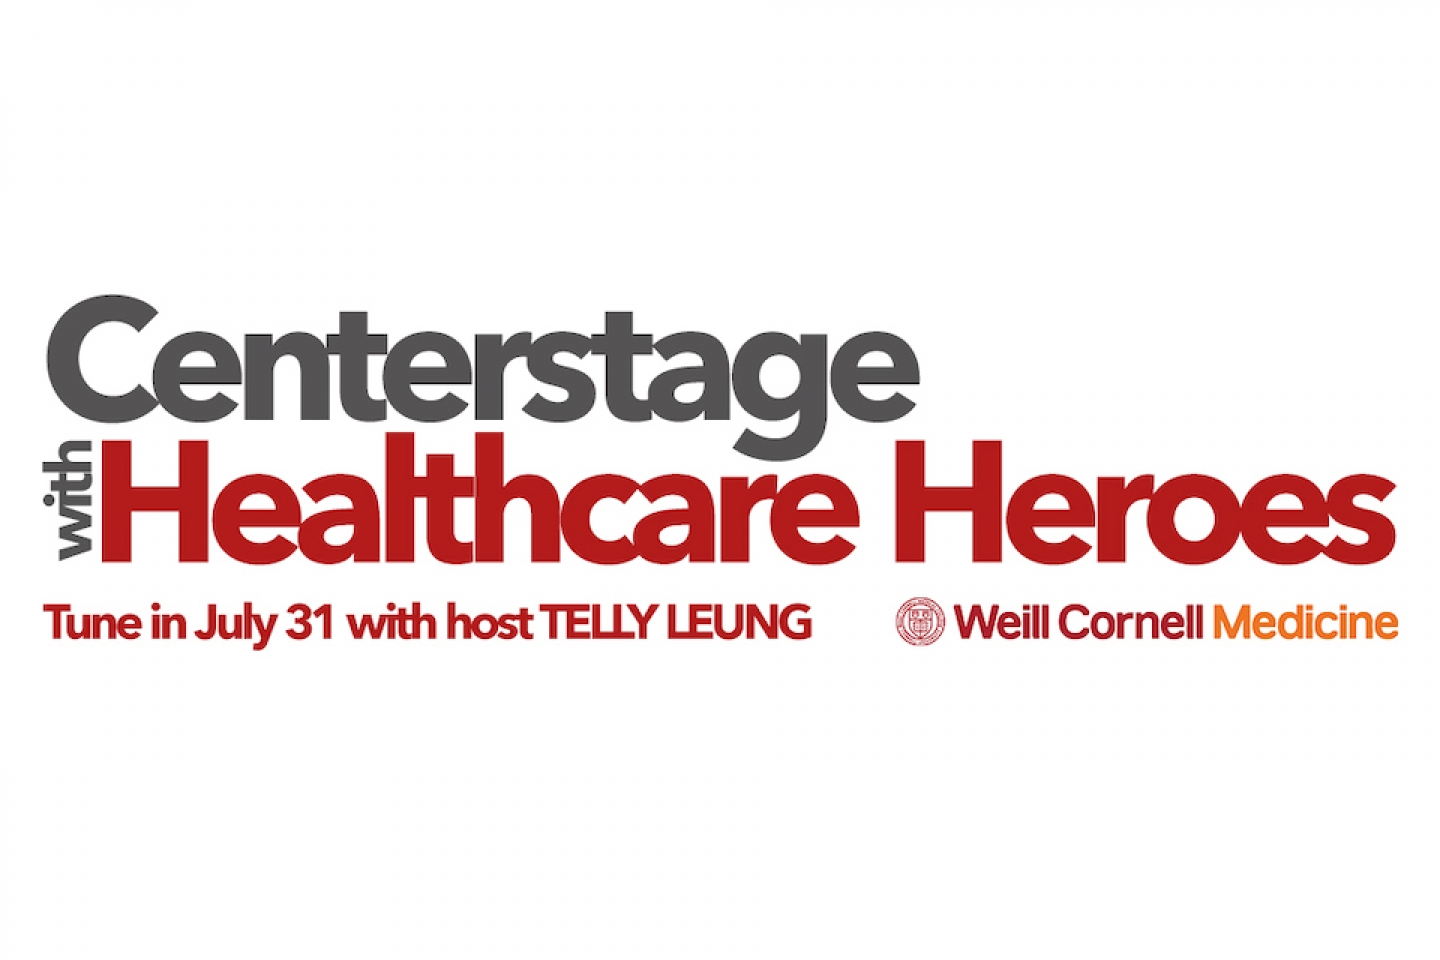 centerstage with healthcare heroes logo